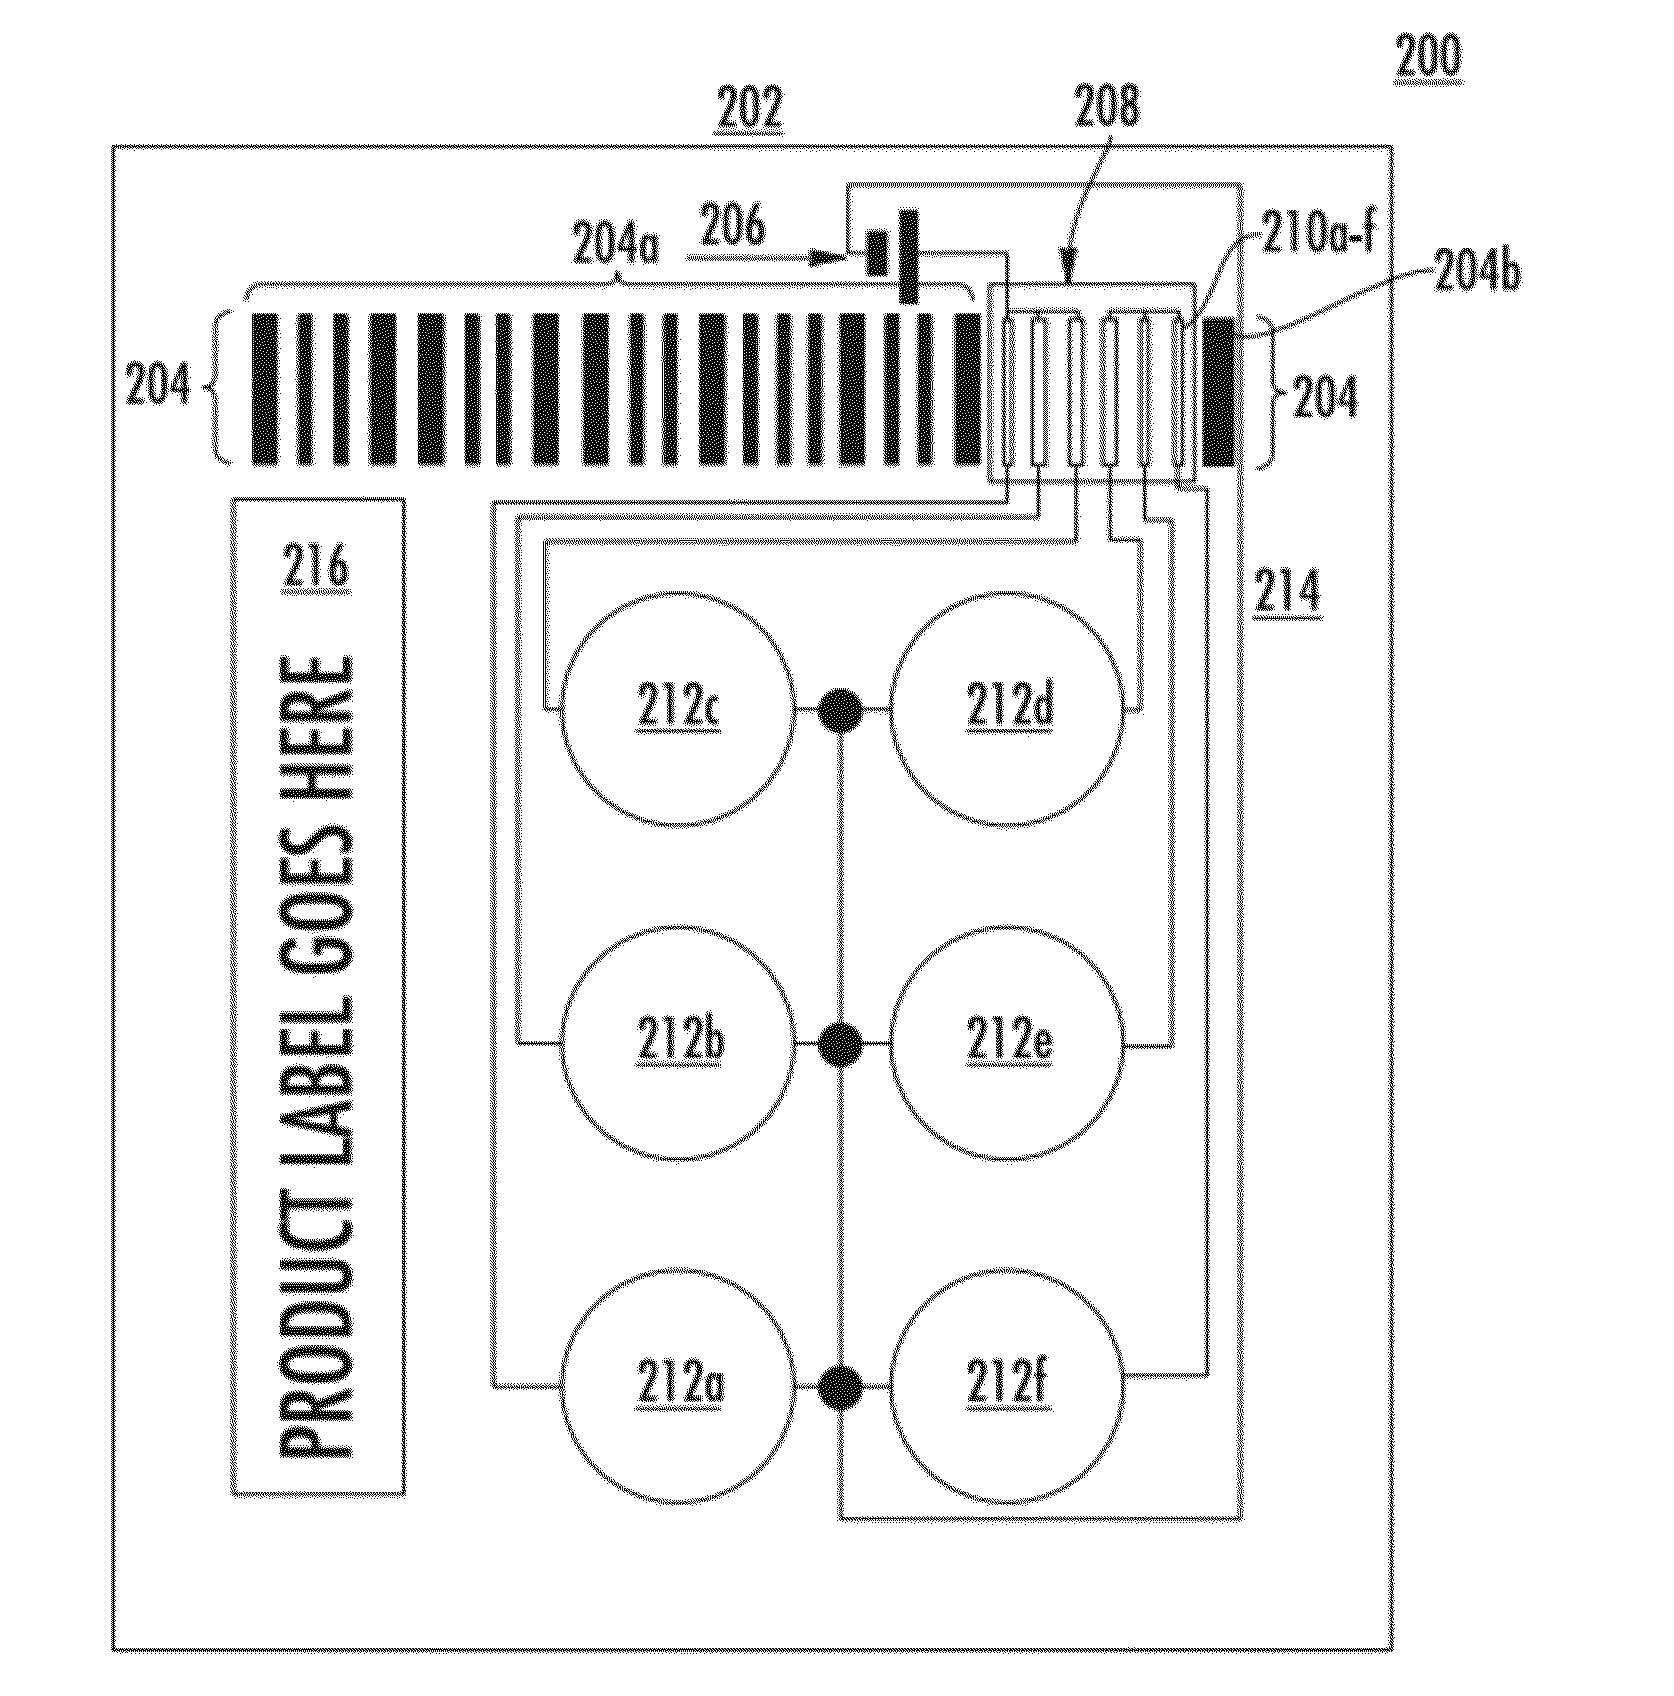 System and method for automating and verifying product value, usage, and suitability for use or sale